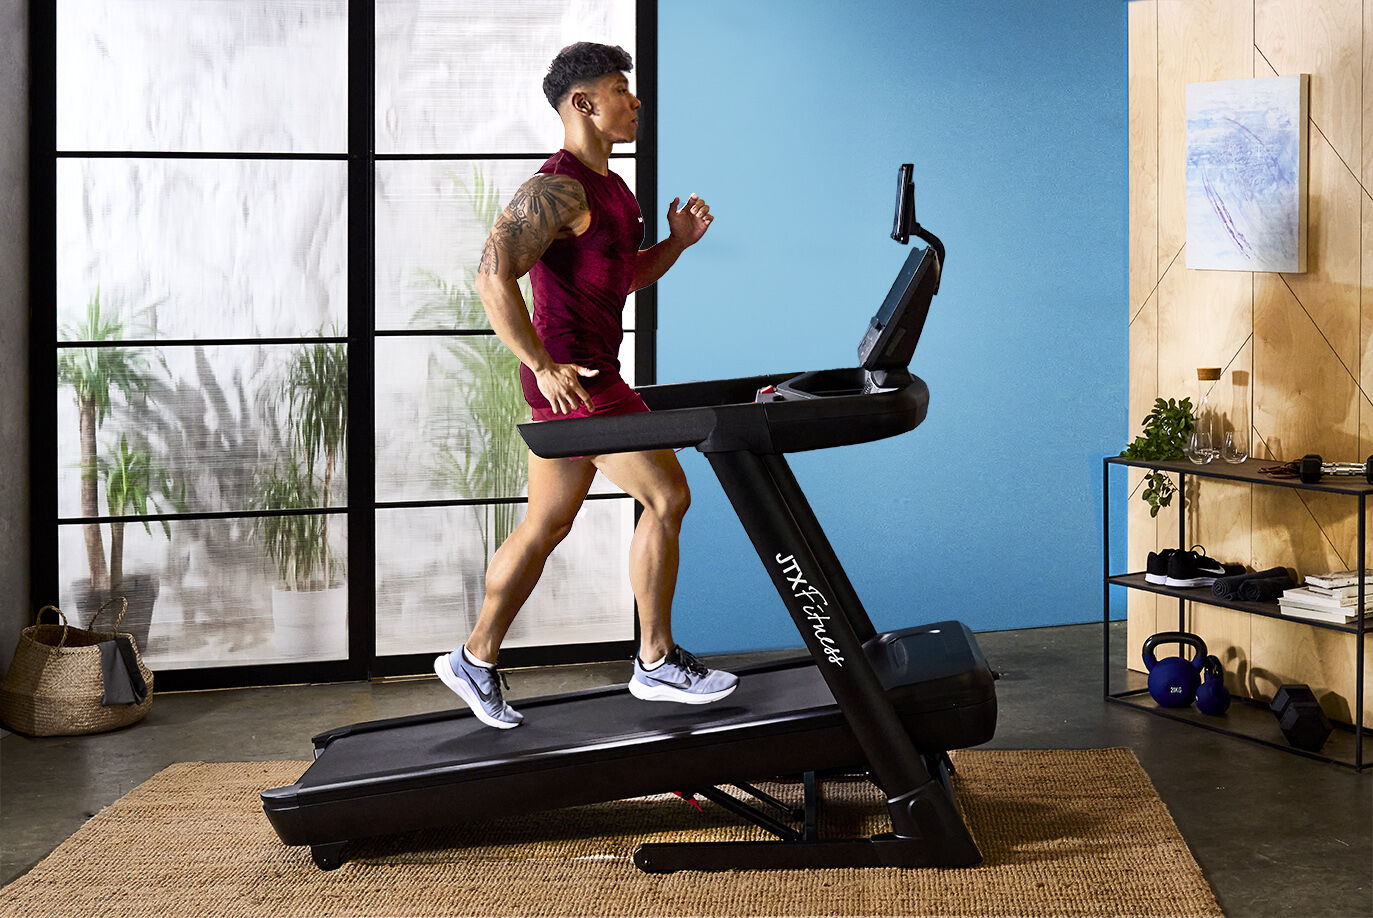 JTX Sprint-8 Pro - Smart Treadmill With Folding Capabilities For Home Use